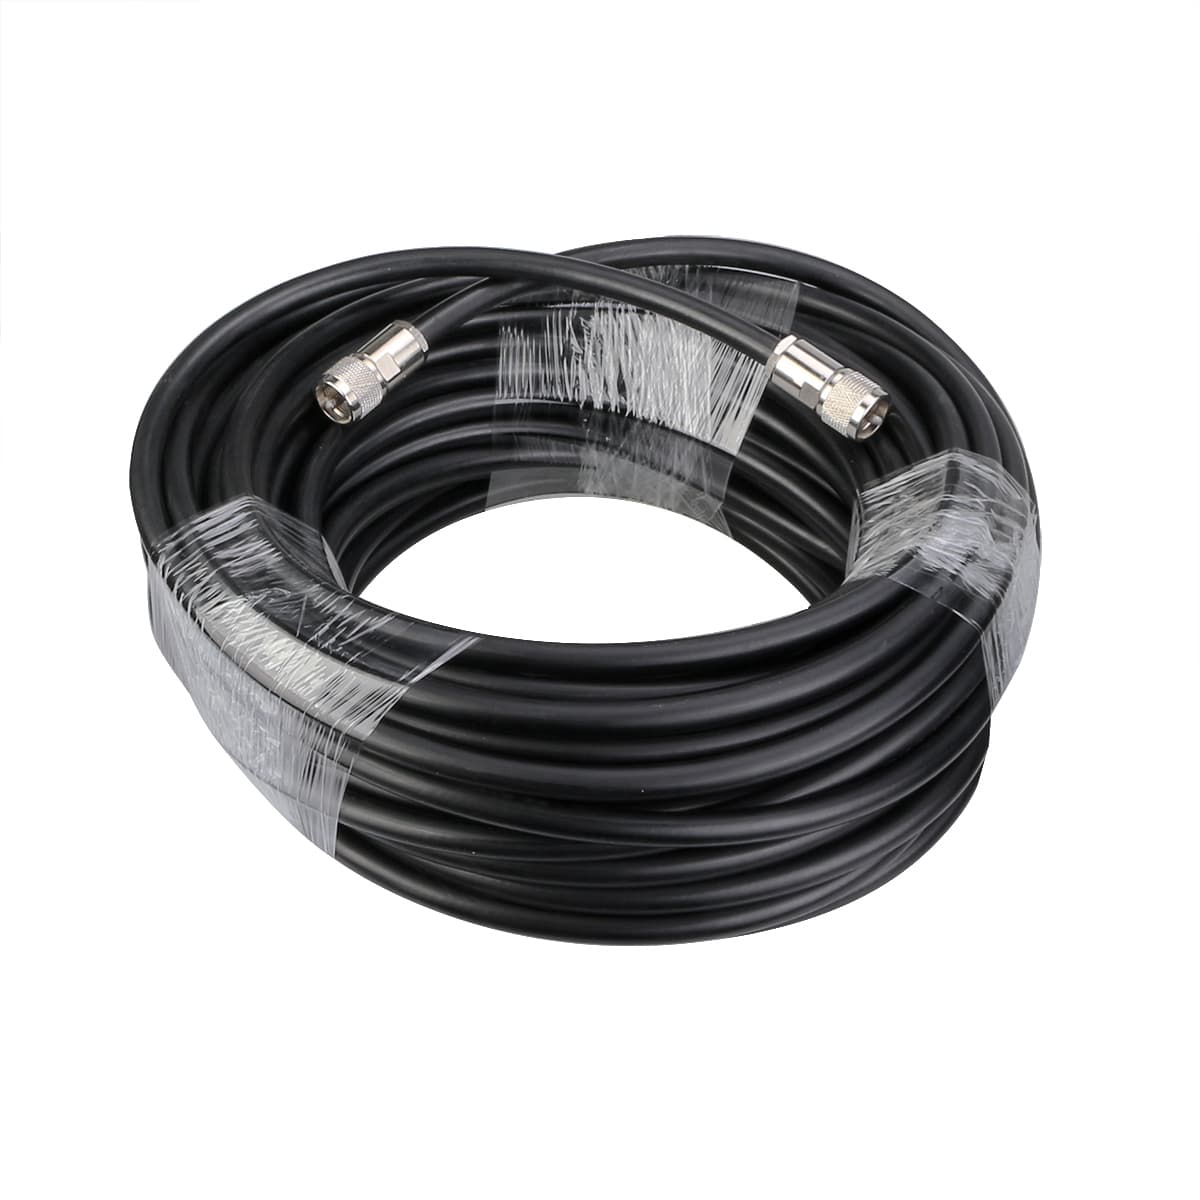 25 Meter Coaxial Cable for Repeater